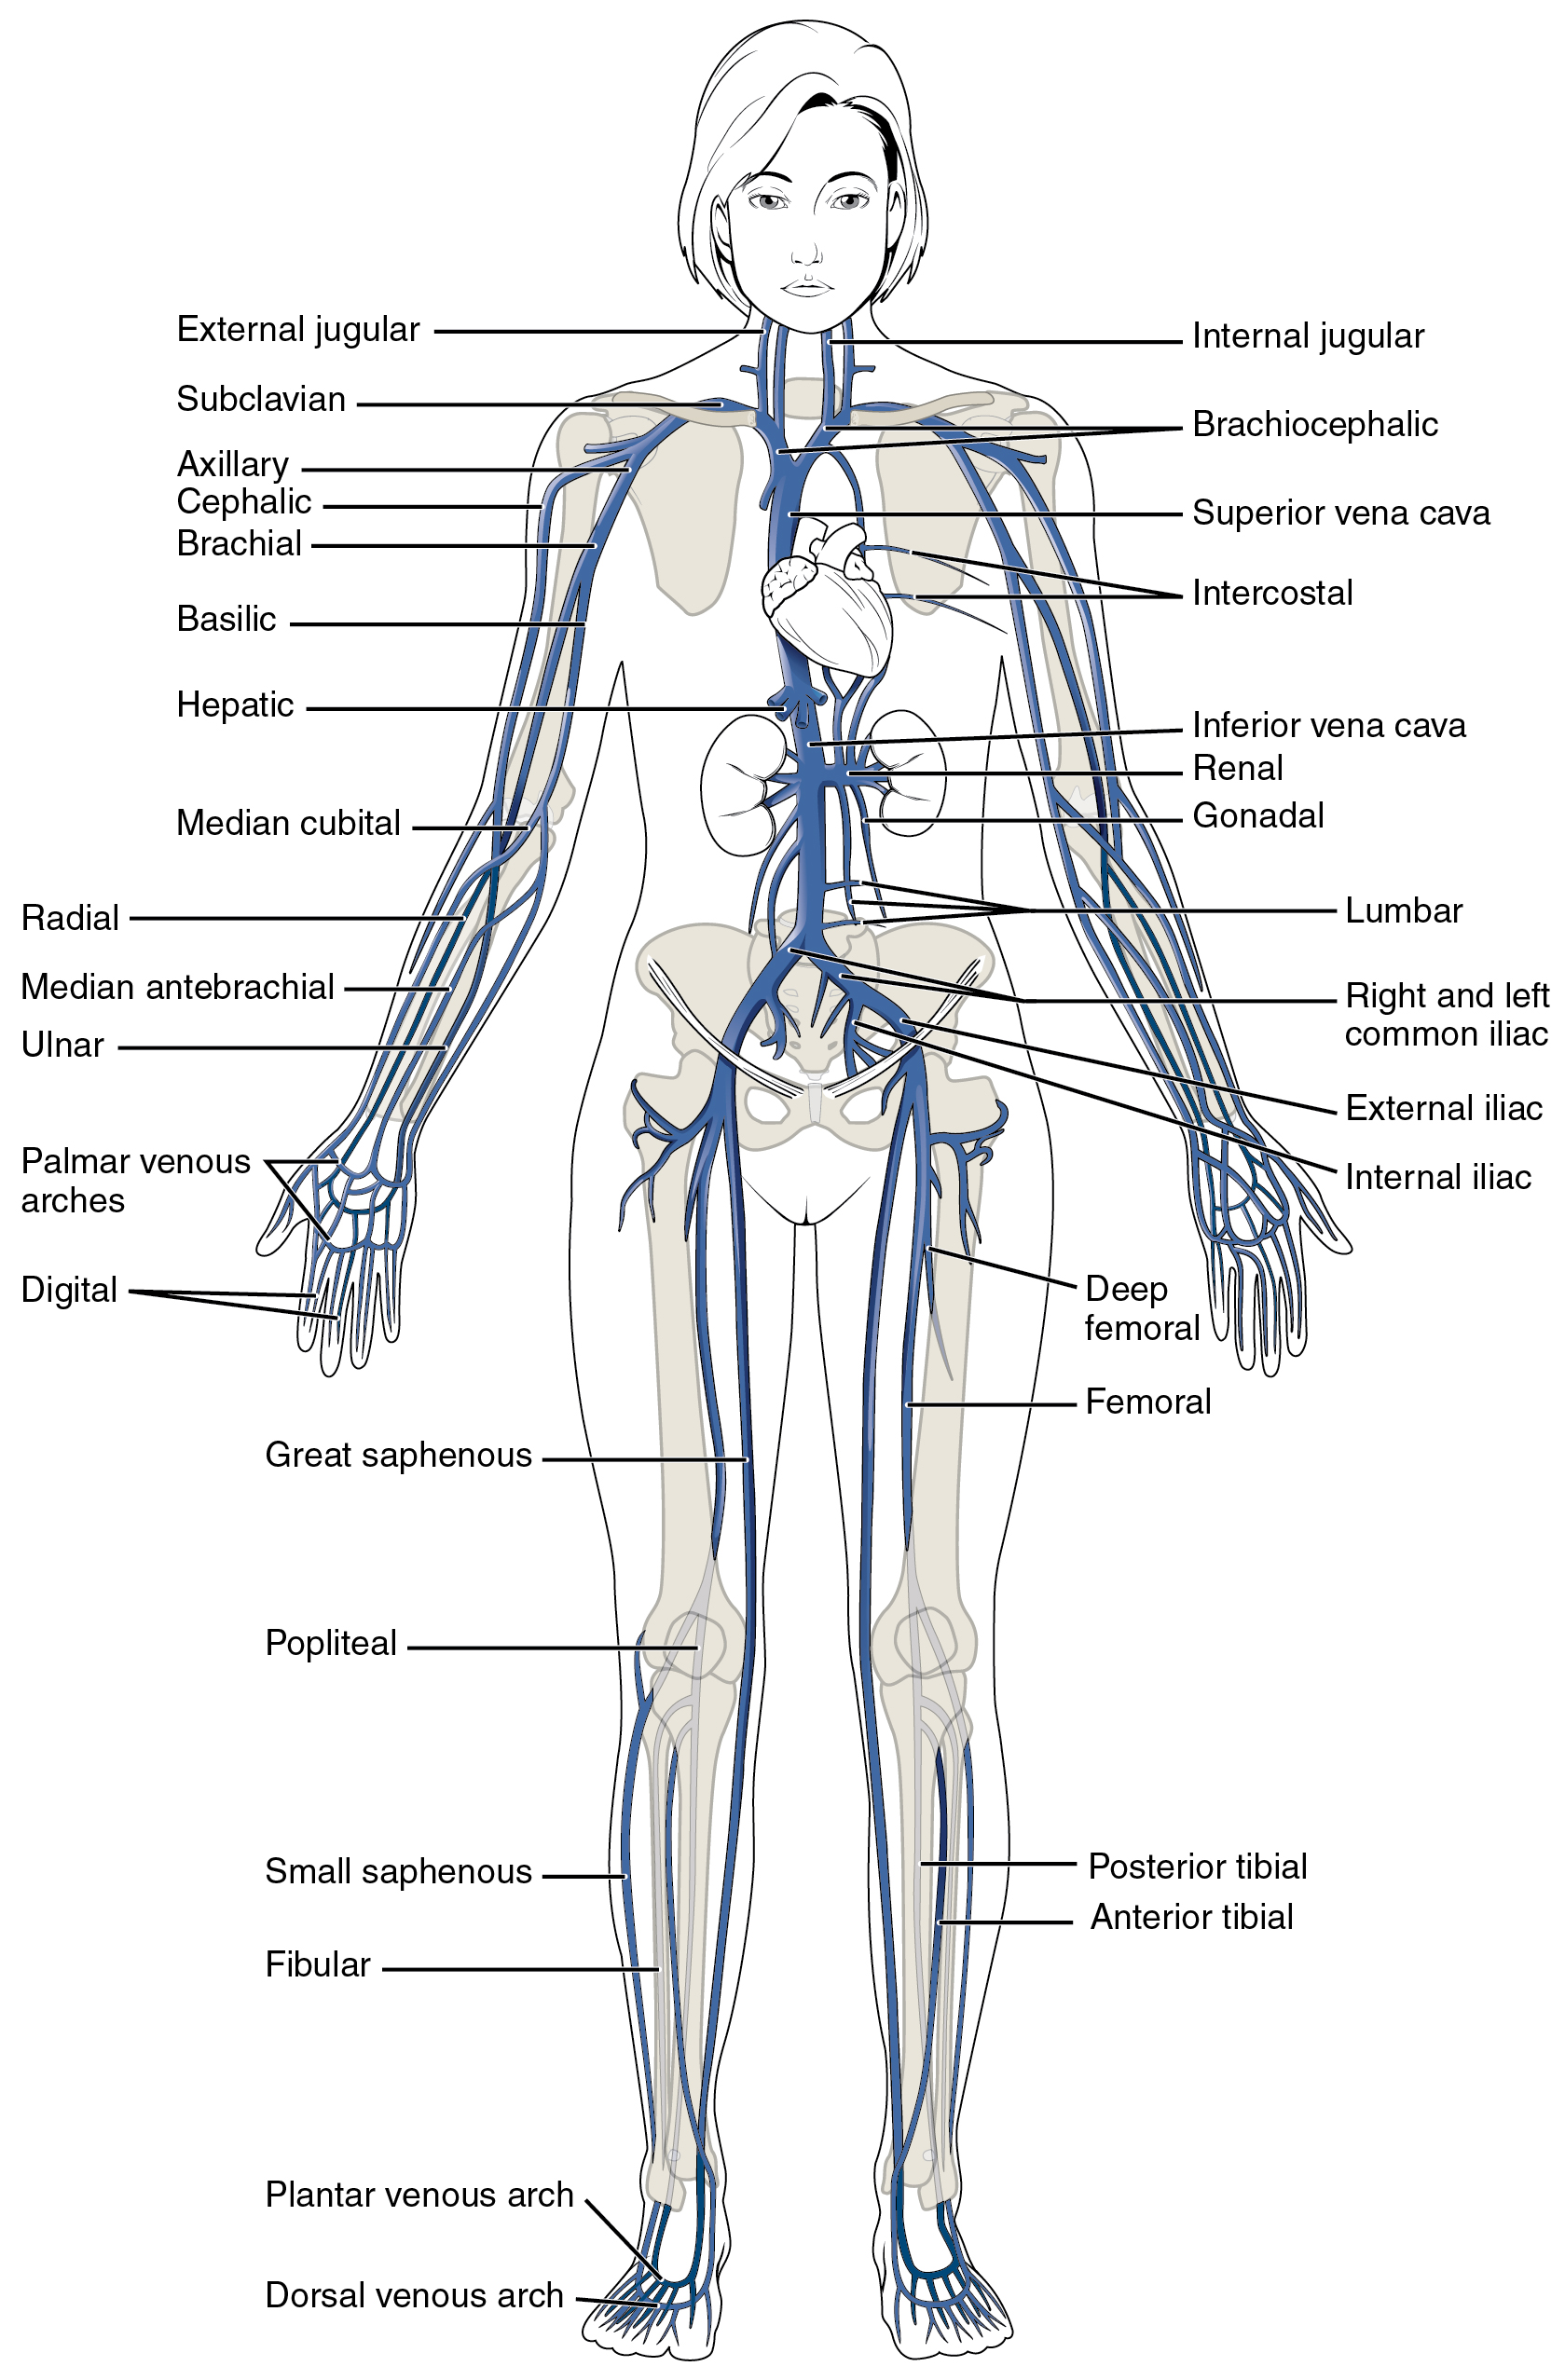 The major veins in the human body. Image description available.